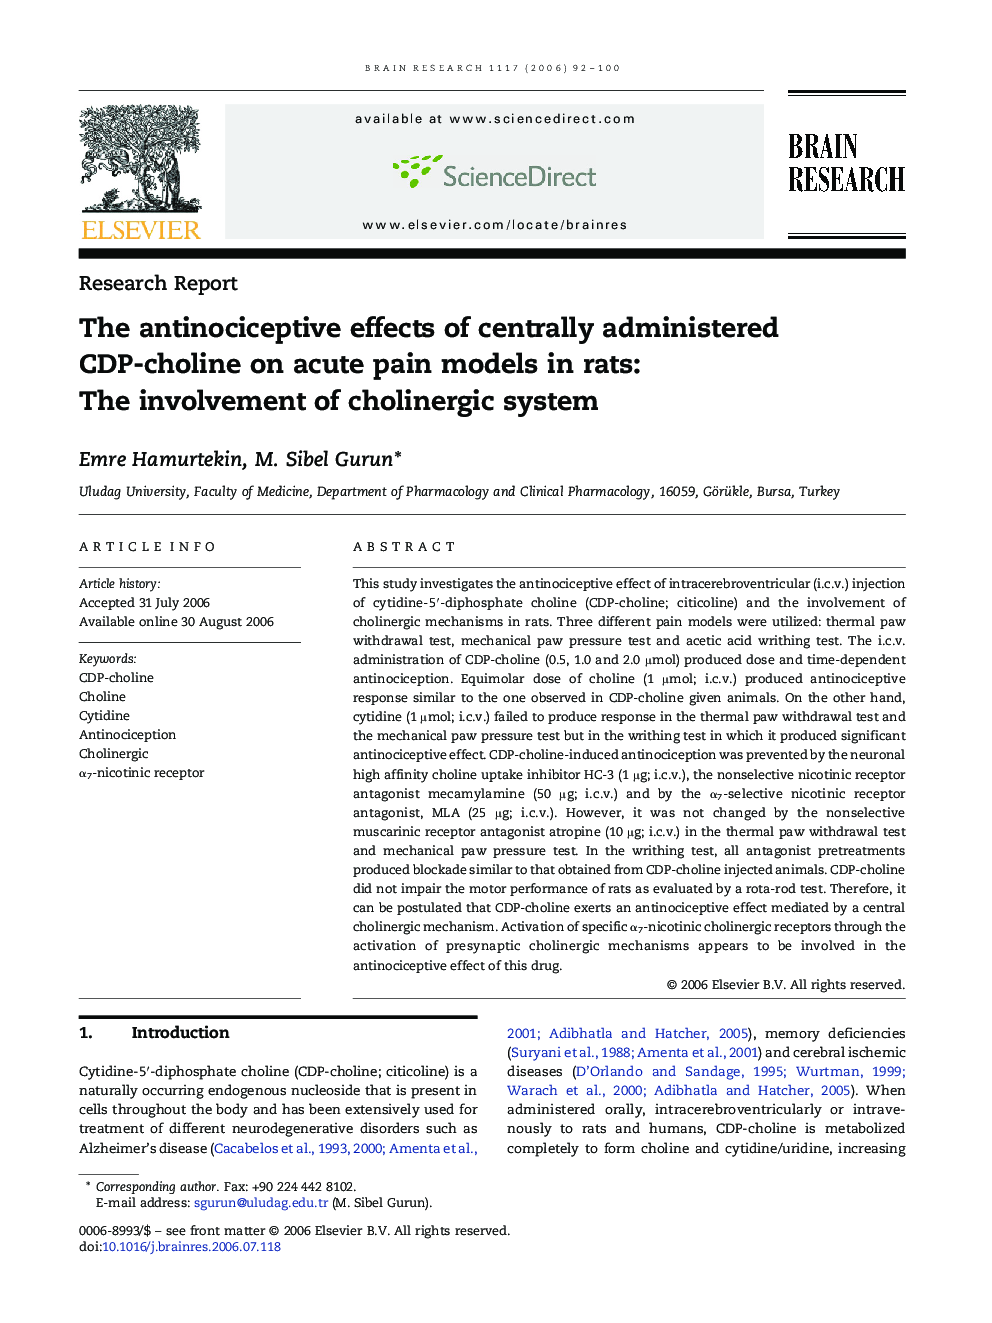 The antinociceptive effects of centrally administered CDP-choline on acute pain models in rats: The involvement of cholinergic system